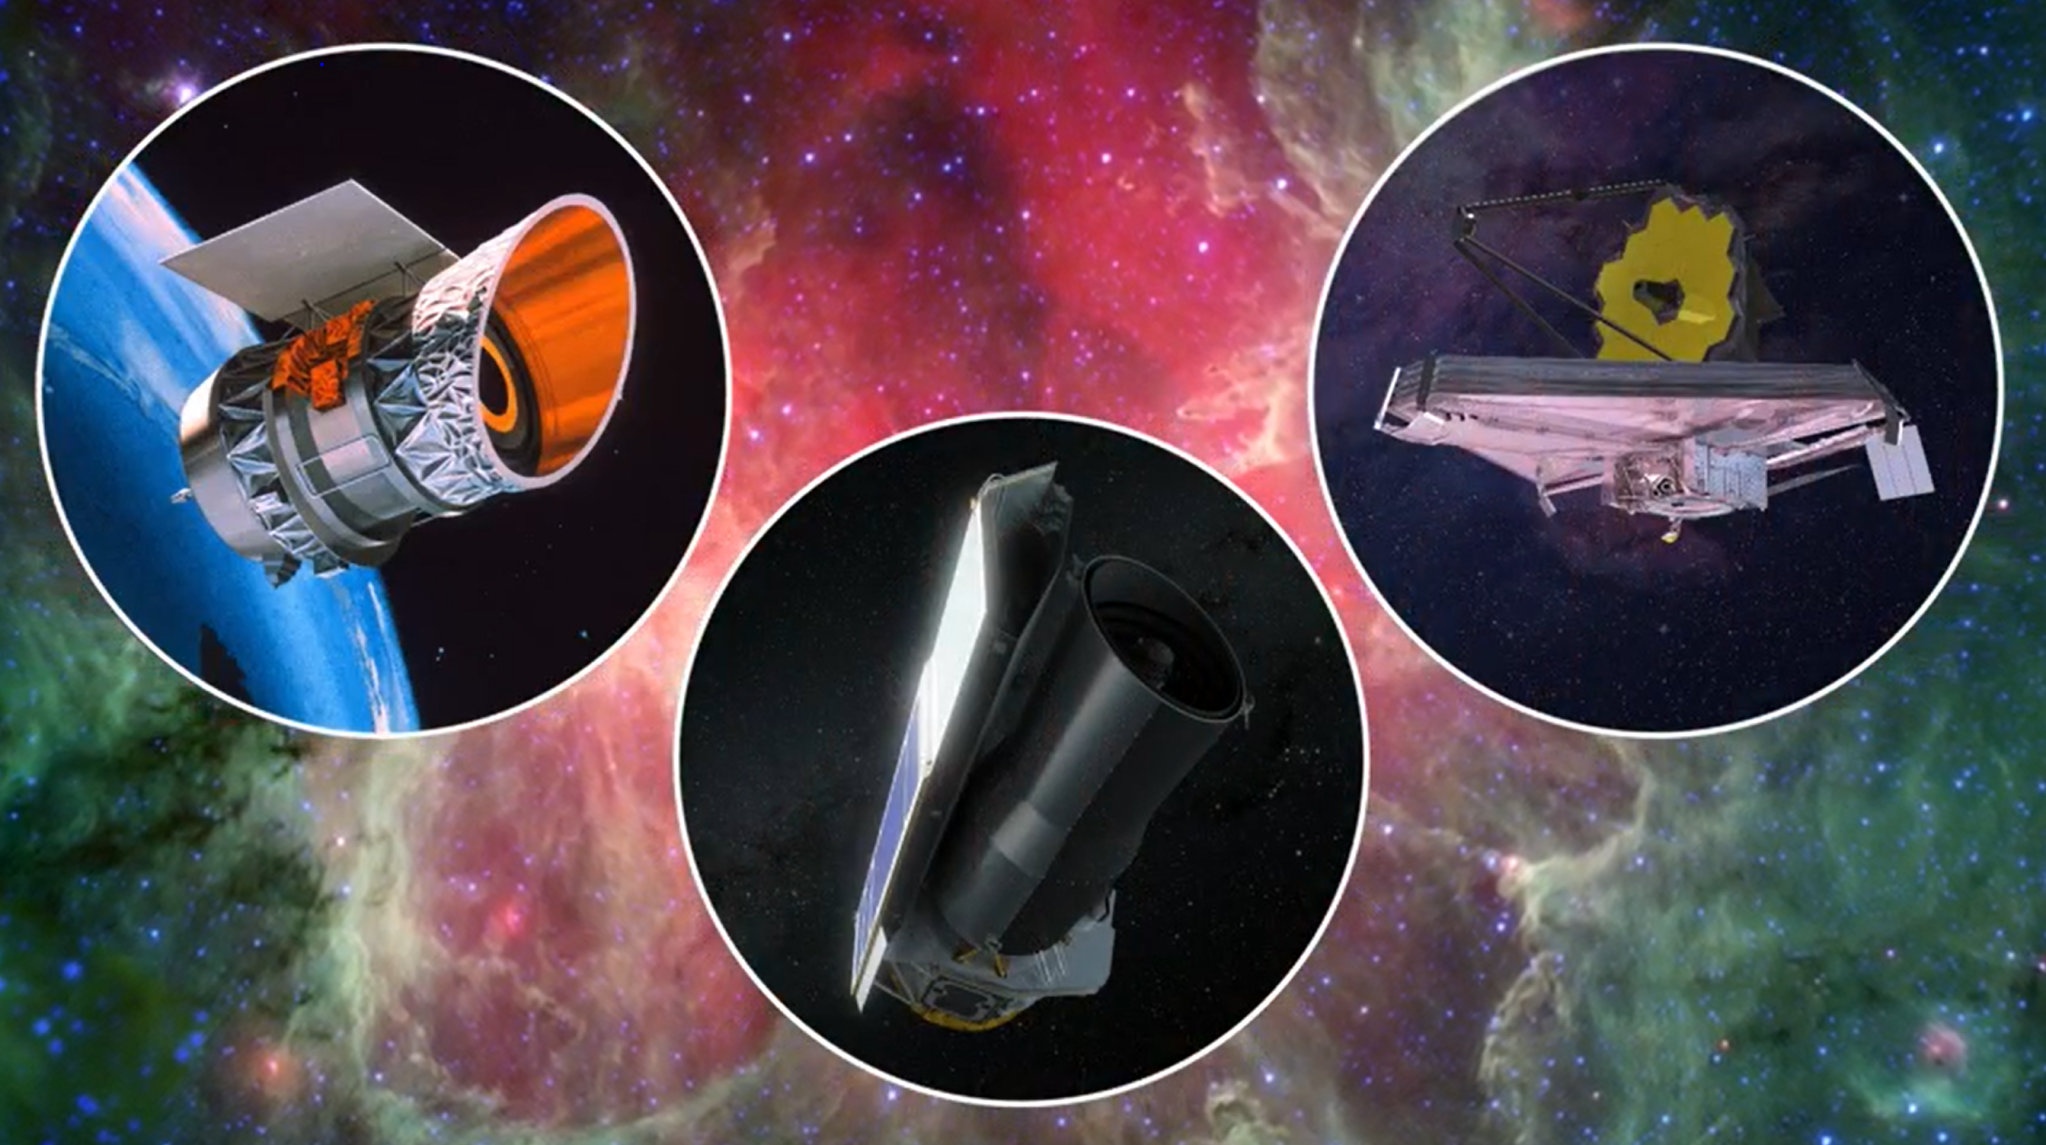 Scientists have been studying the universe with infrared space telescopes for 40 years, including these NASA missions, from left: the Infrared Astronomical Satellite (IRAS), launched in 1983; the Spitzer Space Telescope, launched in 2003; and the James Webb Space Telescope, launched in 2021.